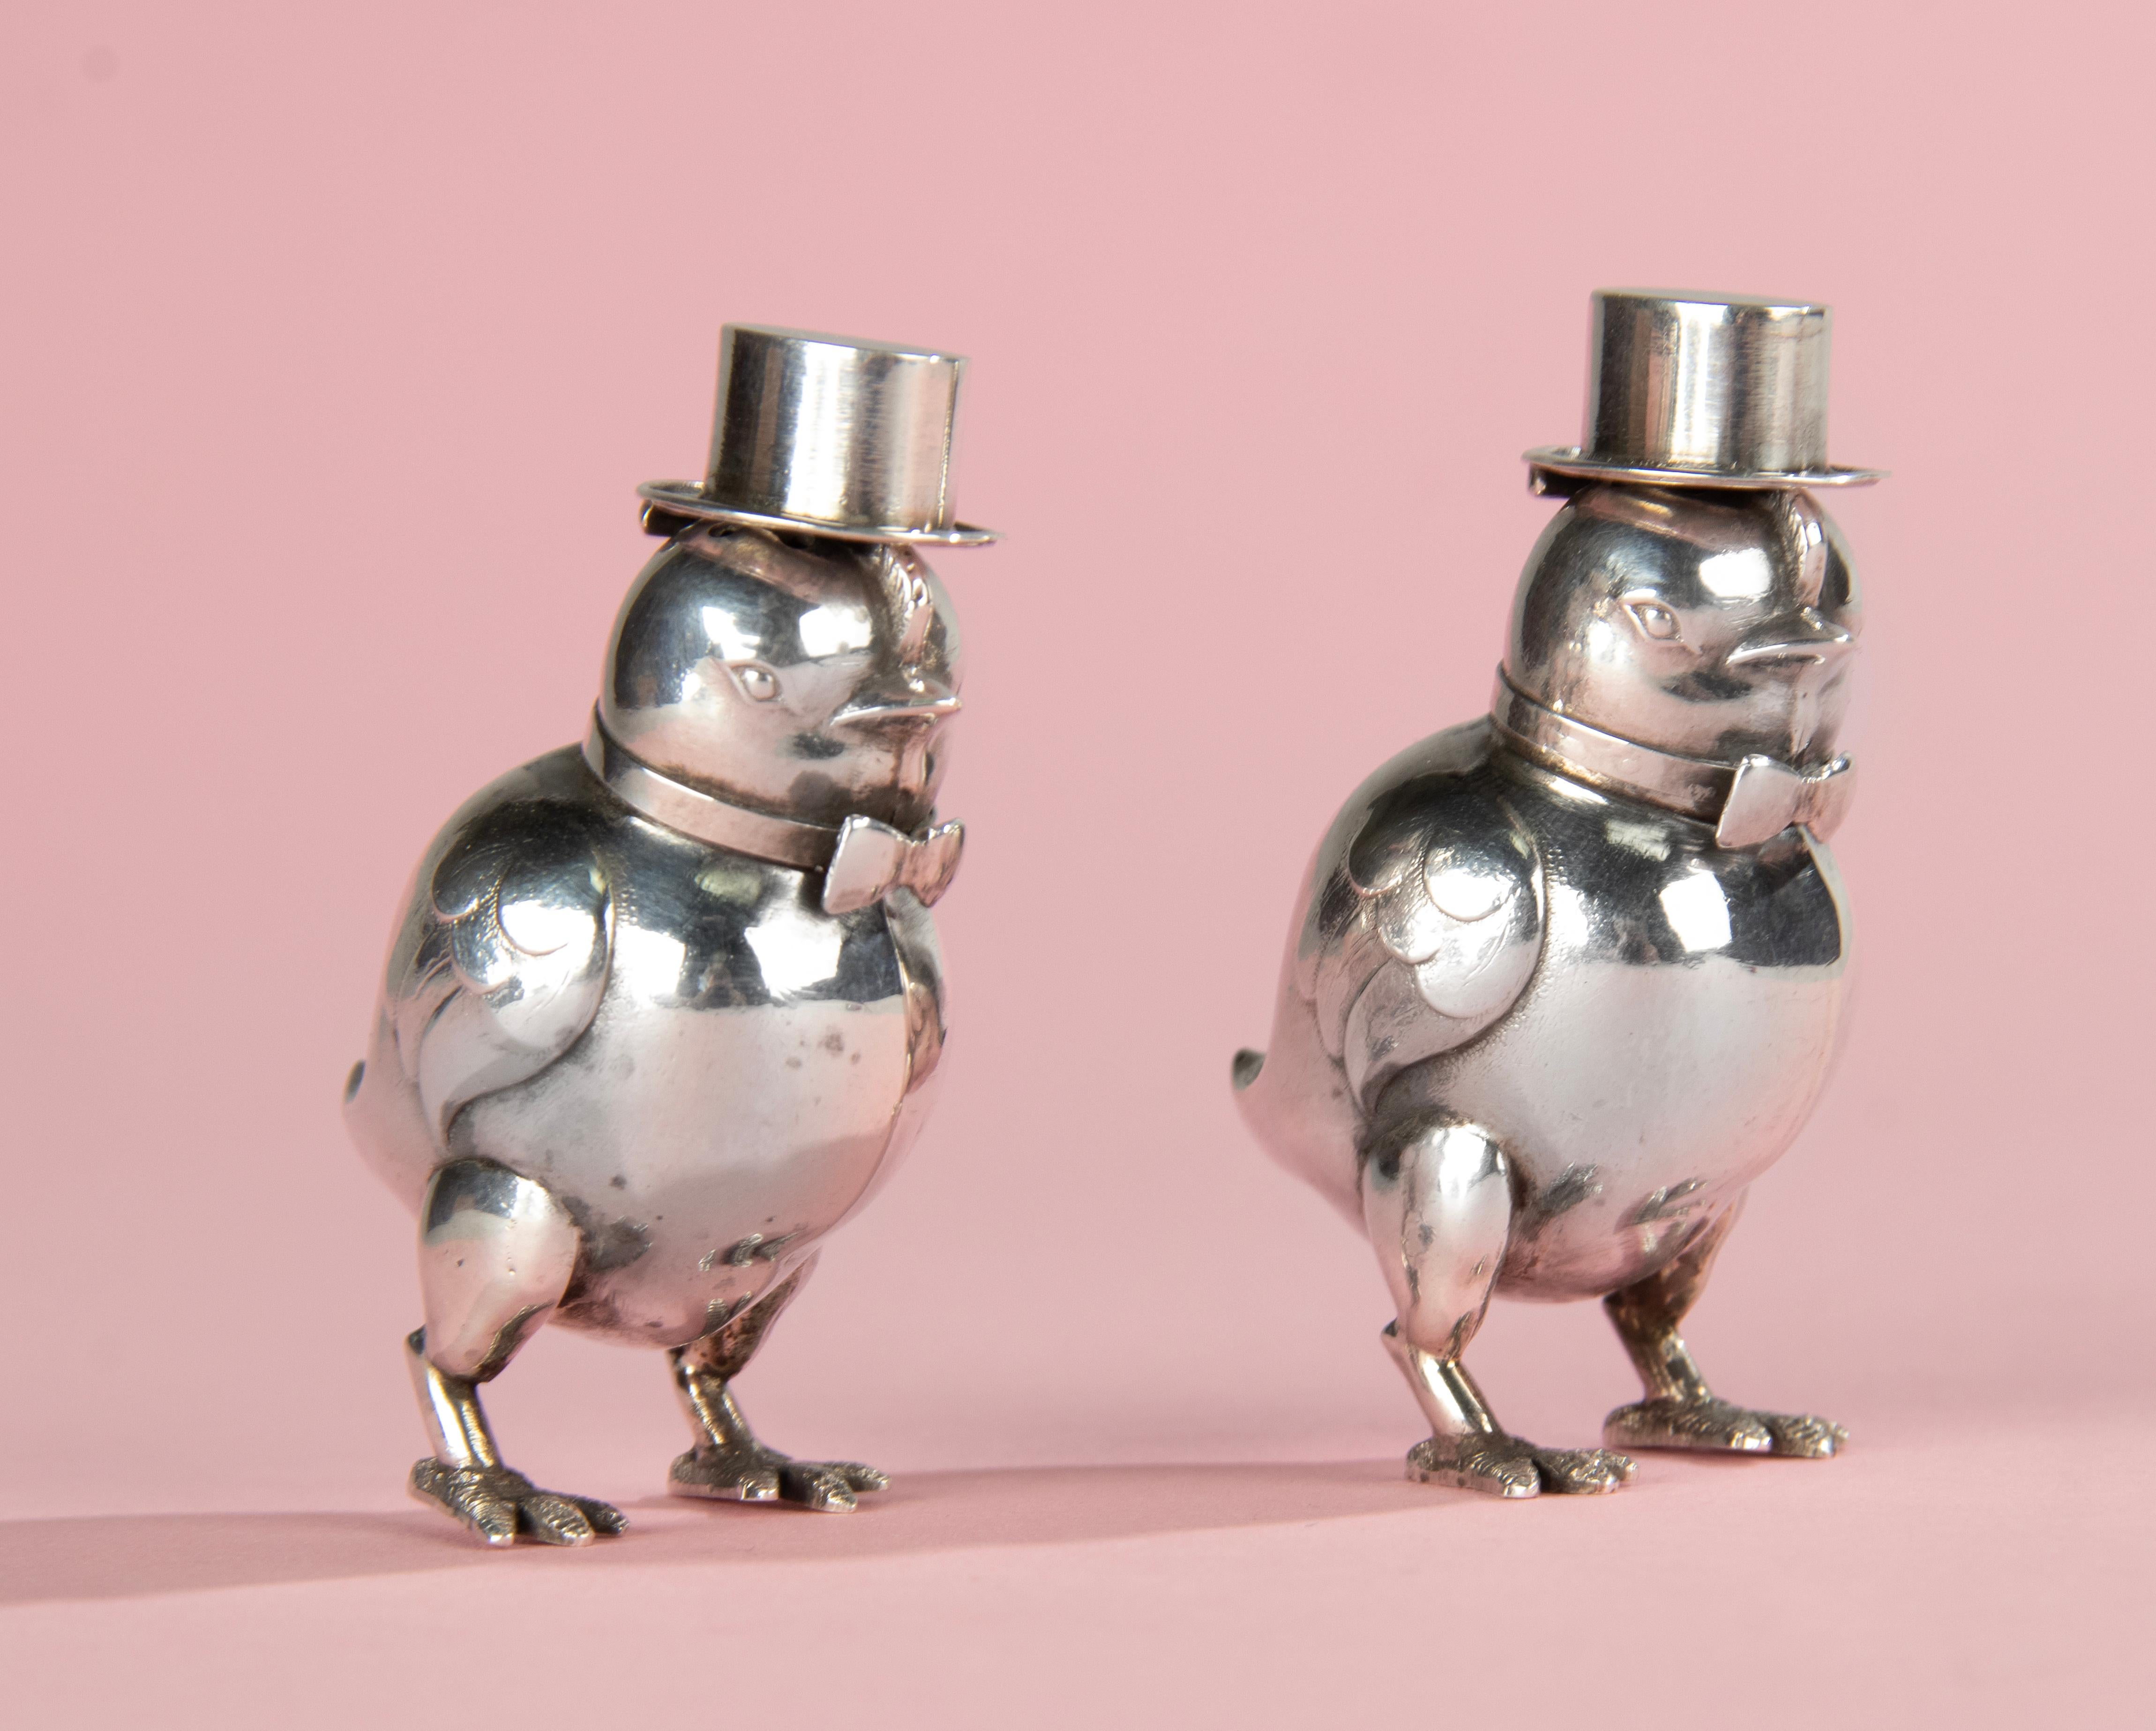 A sweet salt and pepper set, shaped like little birds with hats and bows, made of solid silver.
The set is made with great attention to detail, very refined.
Both pieces are marked, on the bow and on the feet. But the mark is so small that it is